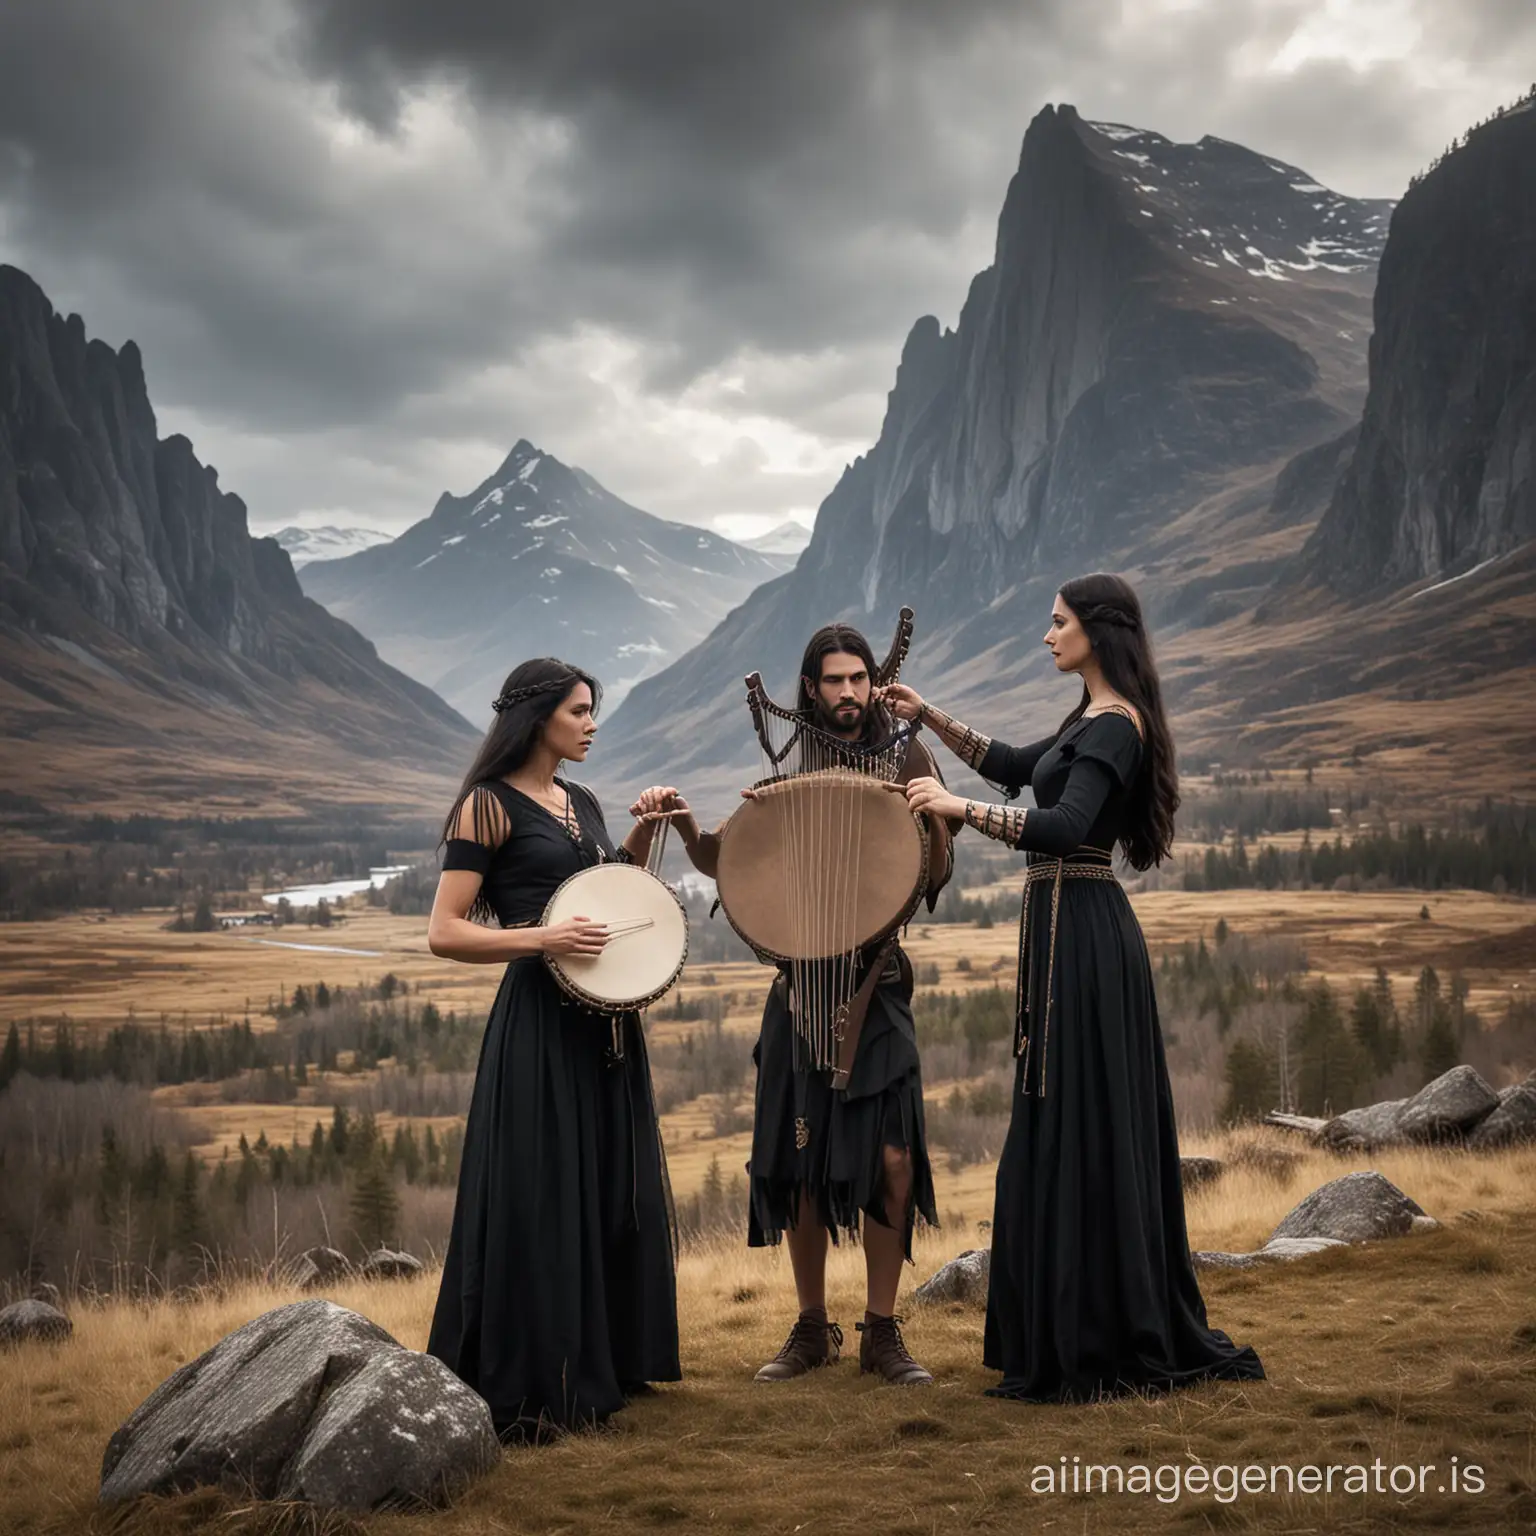 slender norse man and dark haired woman playing lyre and hand drum with a mountain background